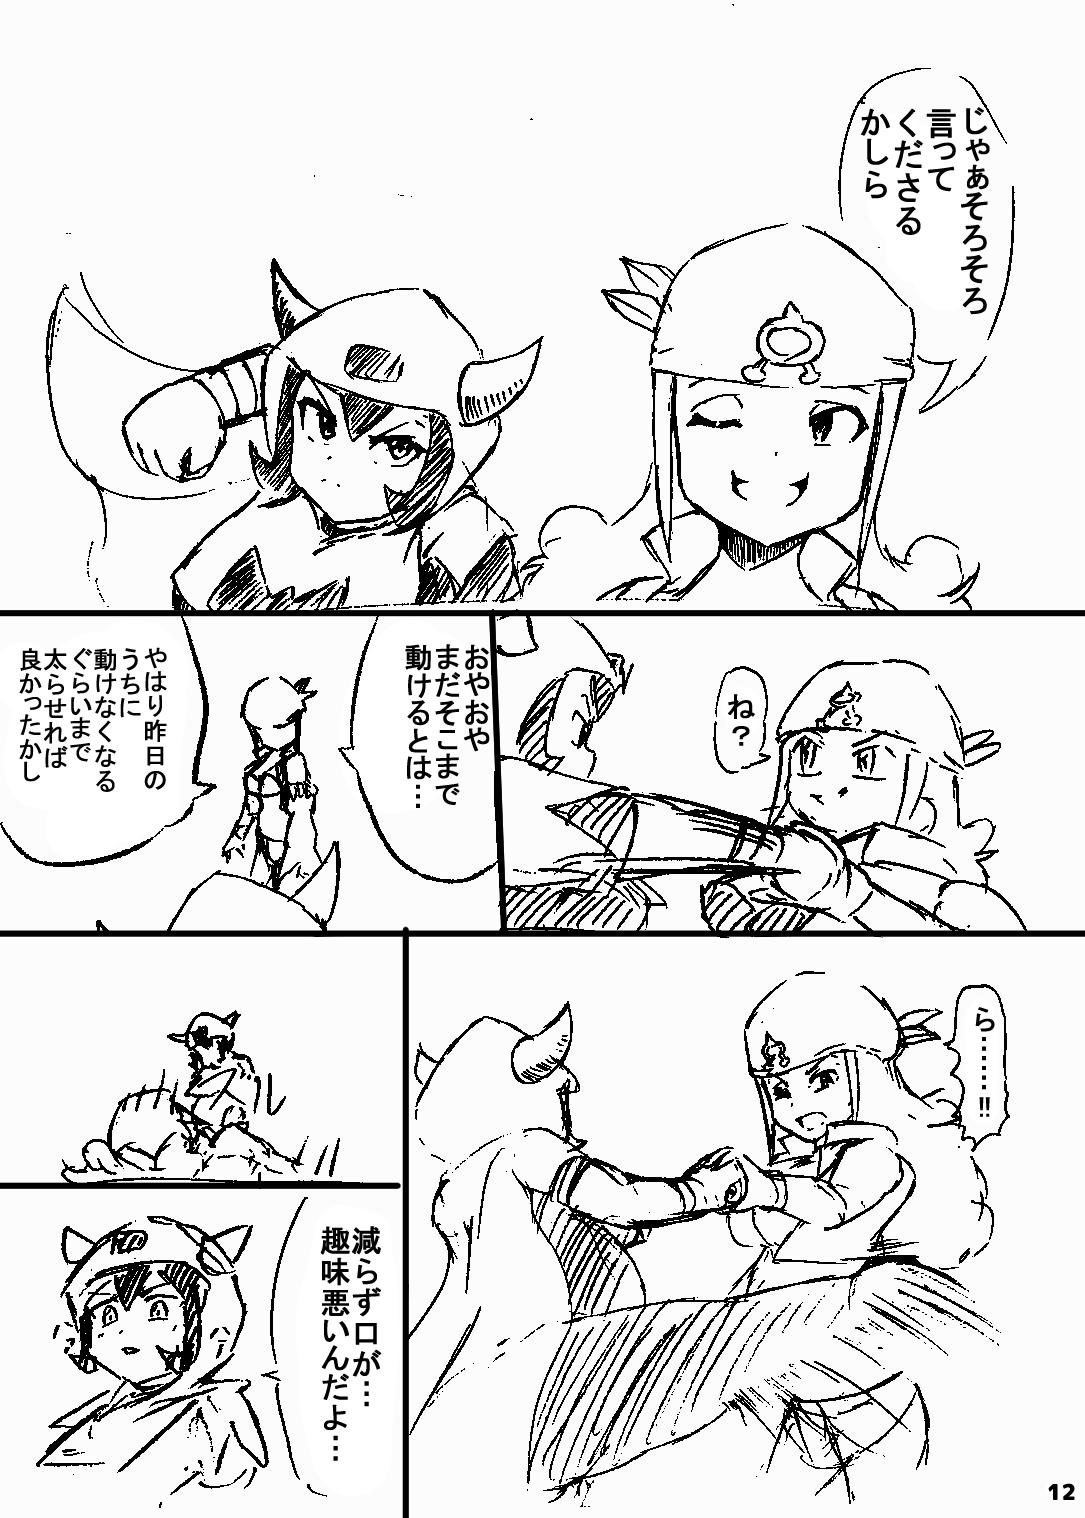 Staxxx ポケスペカガリ肥満化漫画 - Pokemon Hot Pussy - Page 11